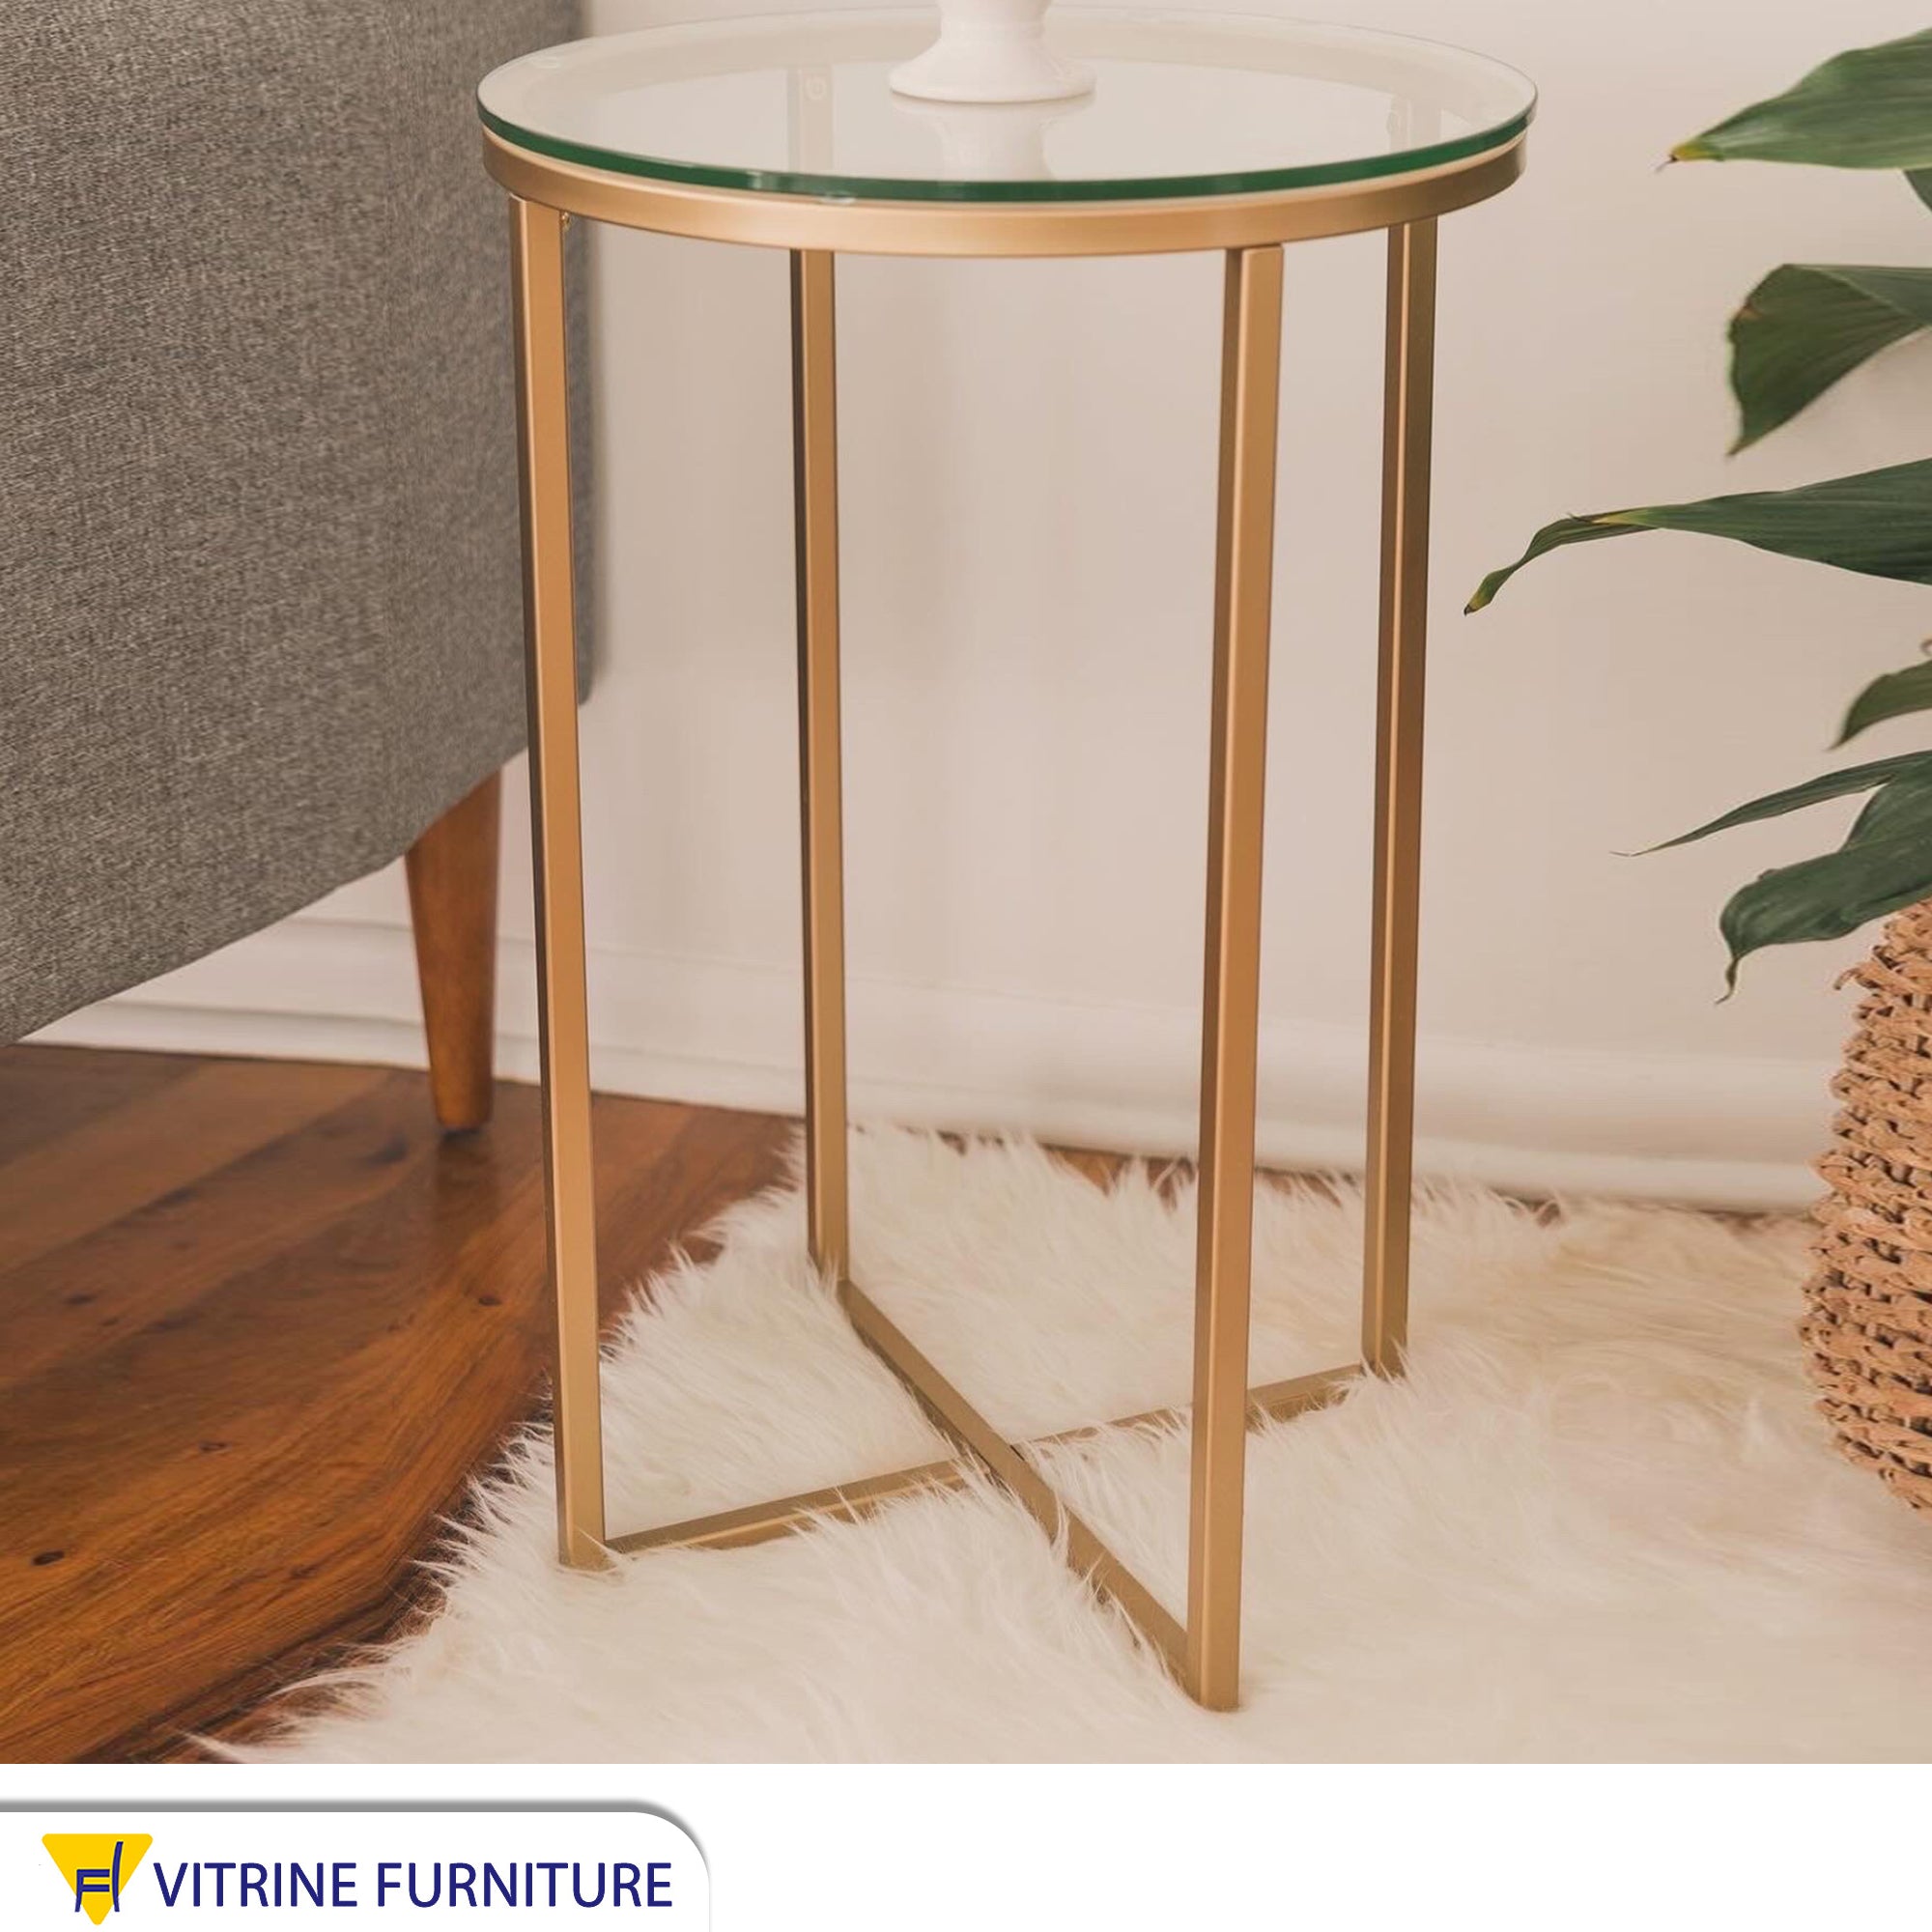 Side table with x-shaped base